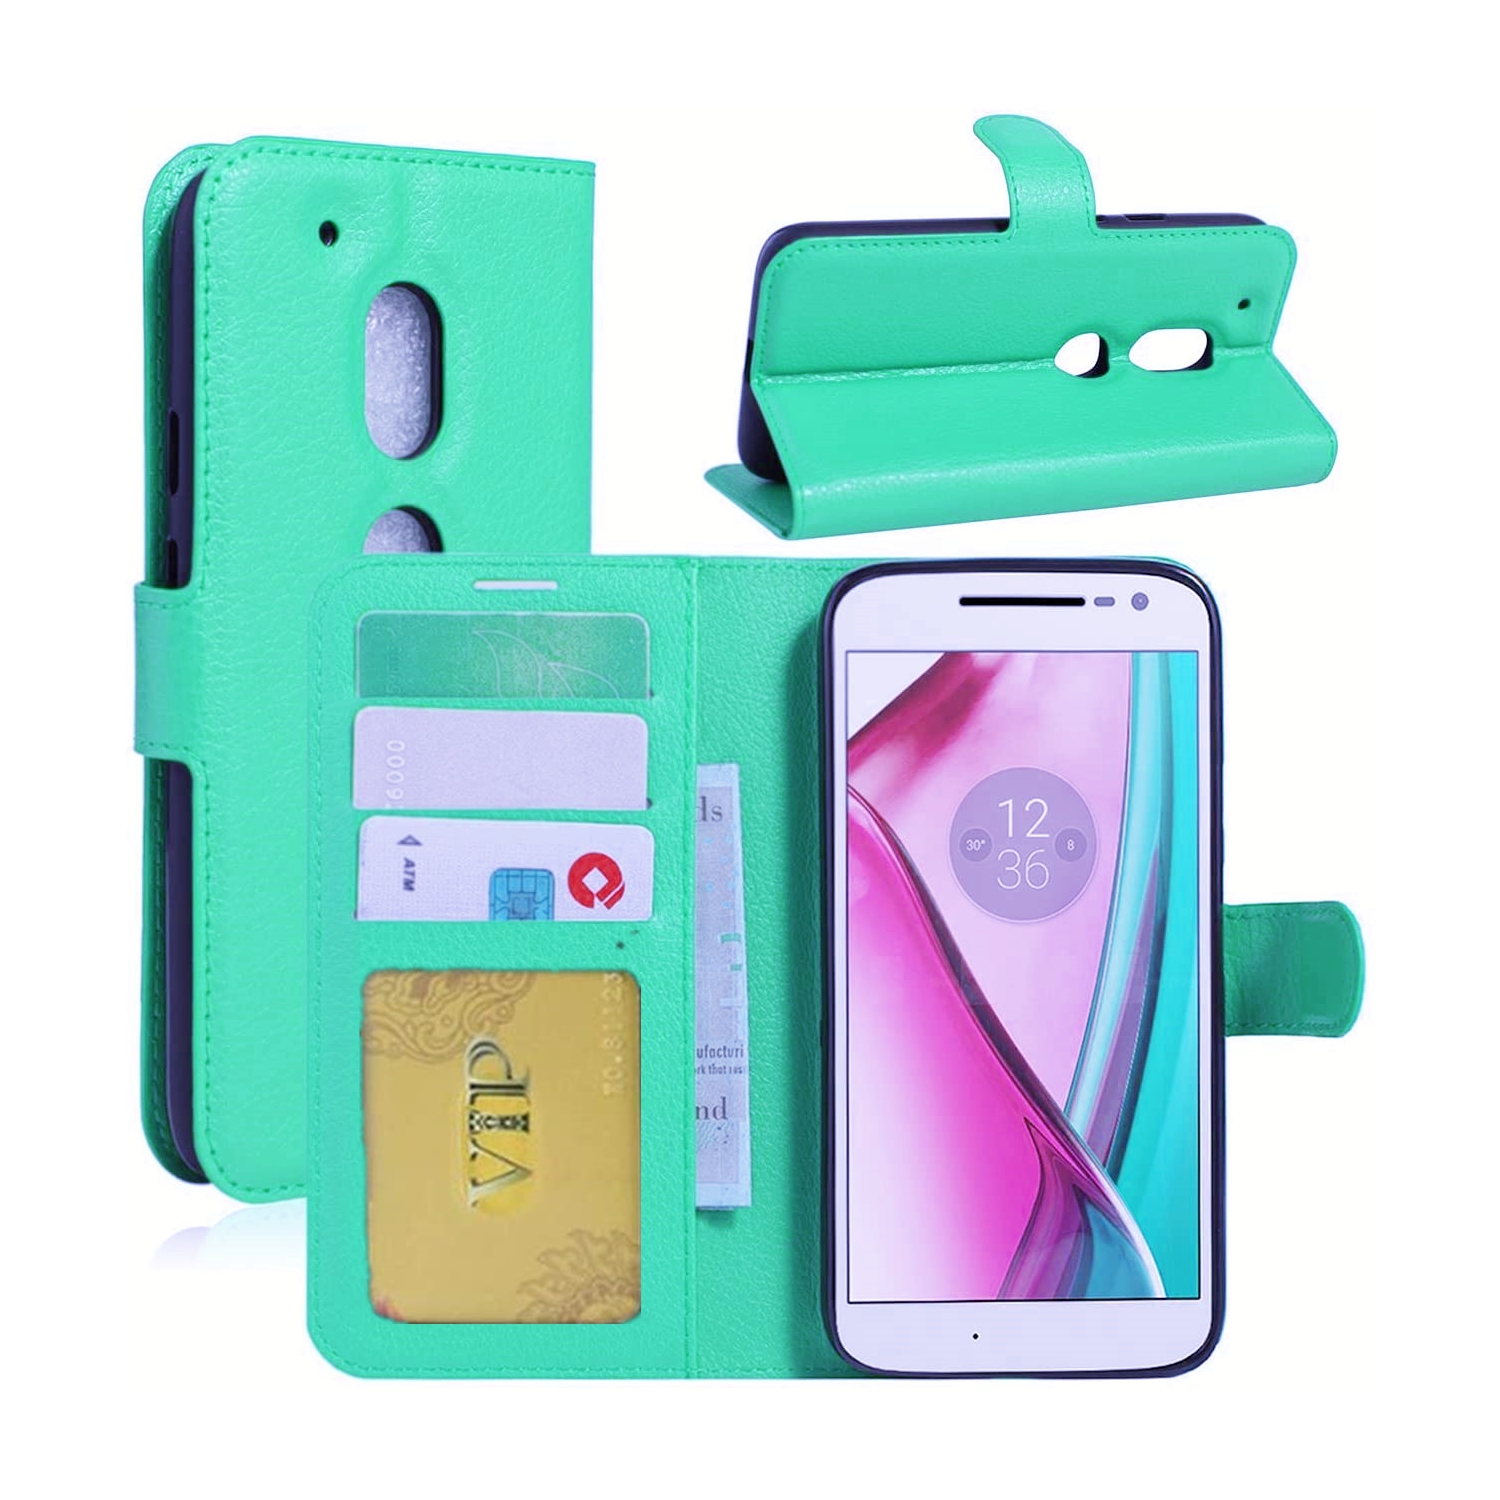 [CS] Motorola Moto G6 Play Case, Magnetic Leather Folio Wallet Flip Case Cover with Card Slot, Teal